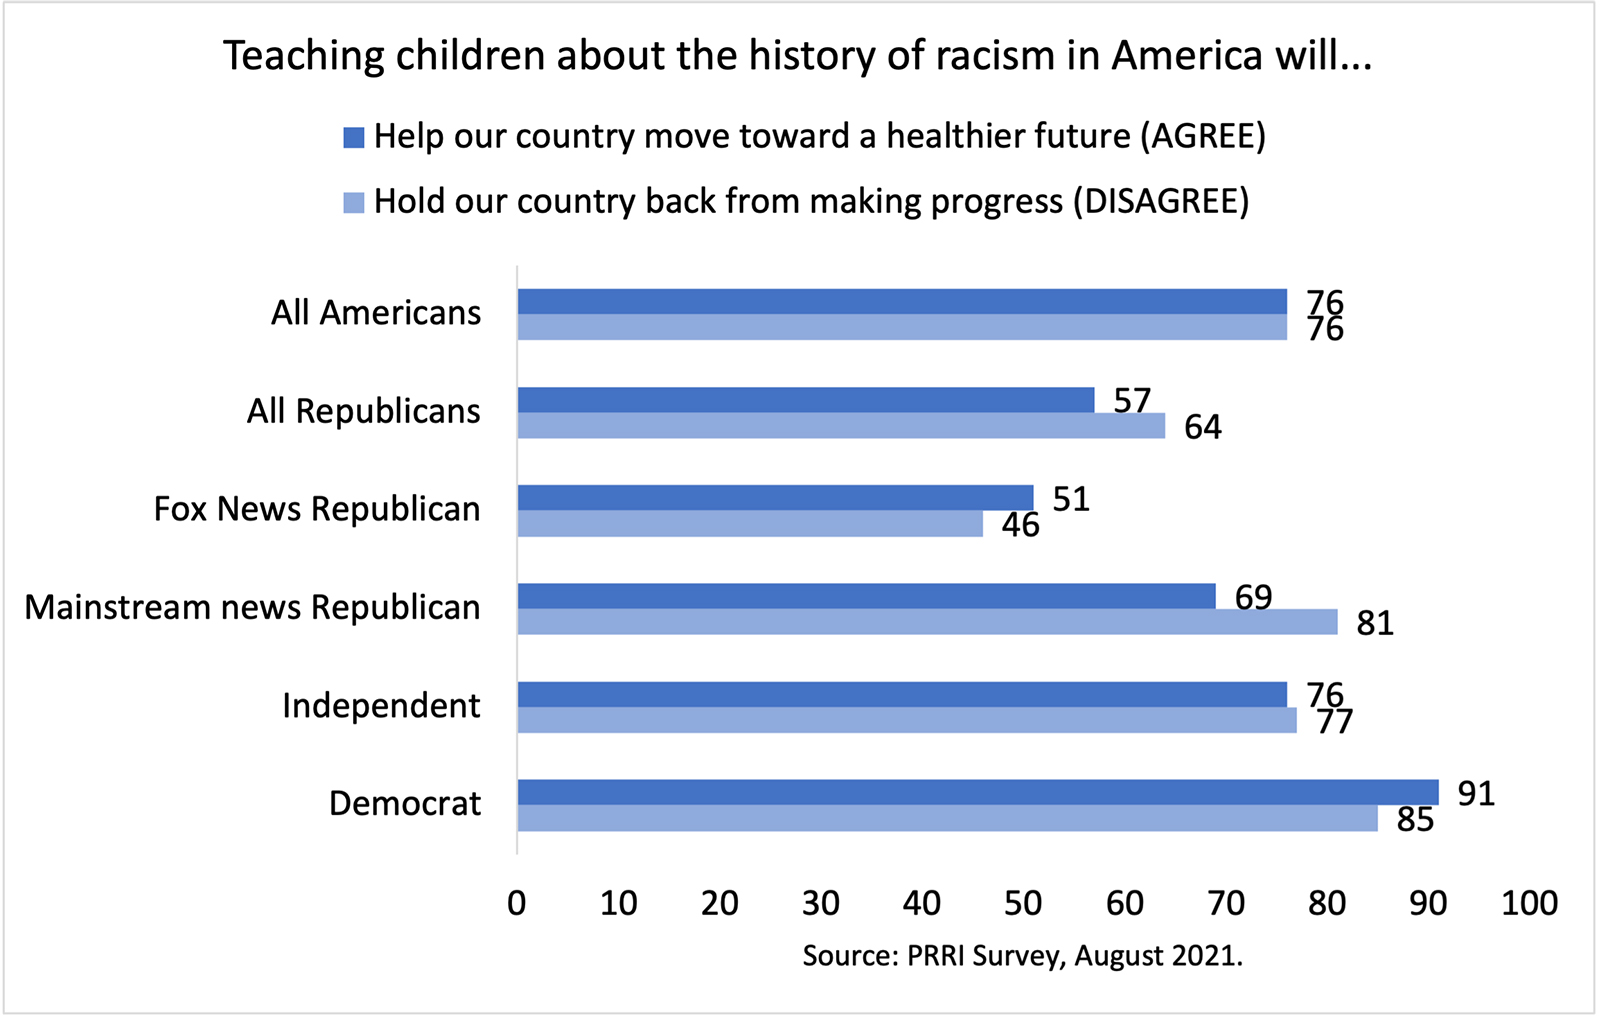 "Teaching children about the history of racism in America will..." Graphic courtesy of Robert P. Jones